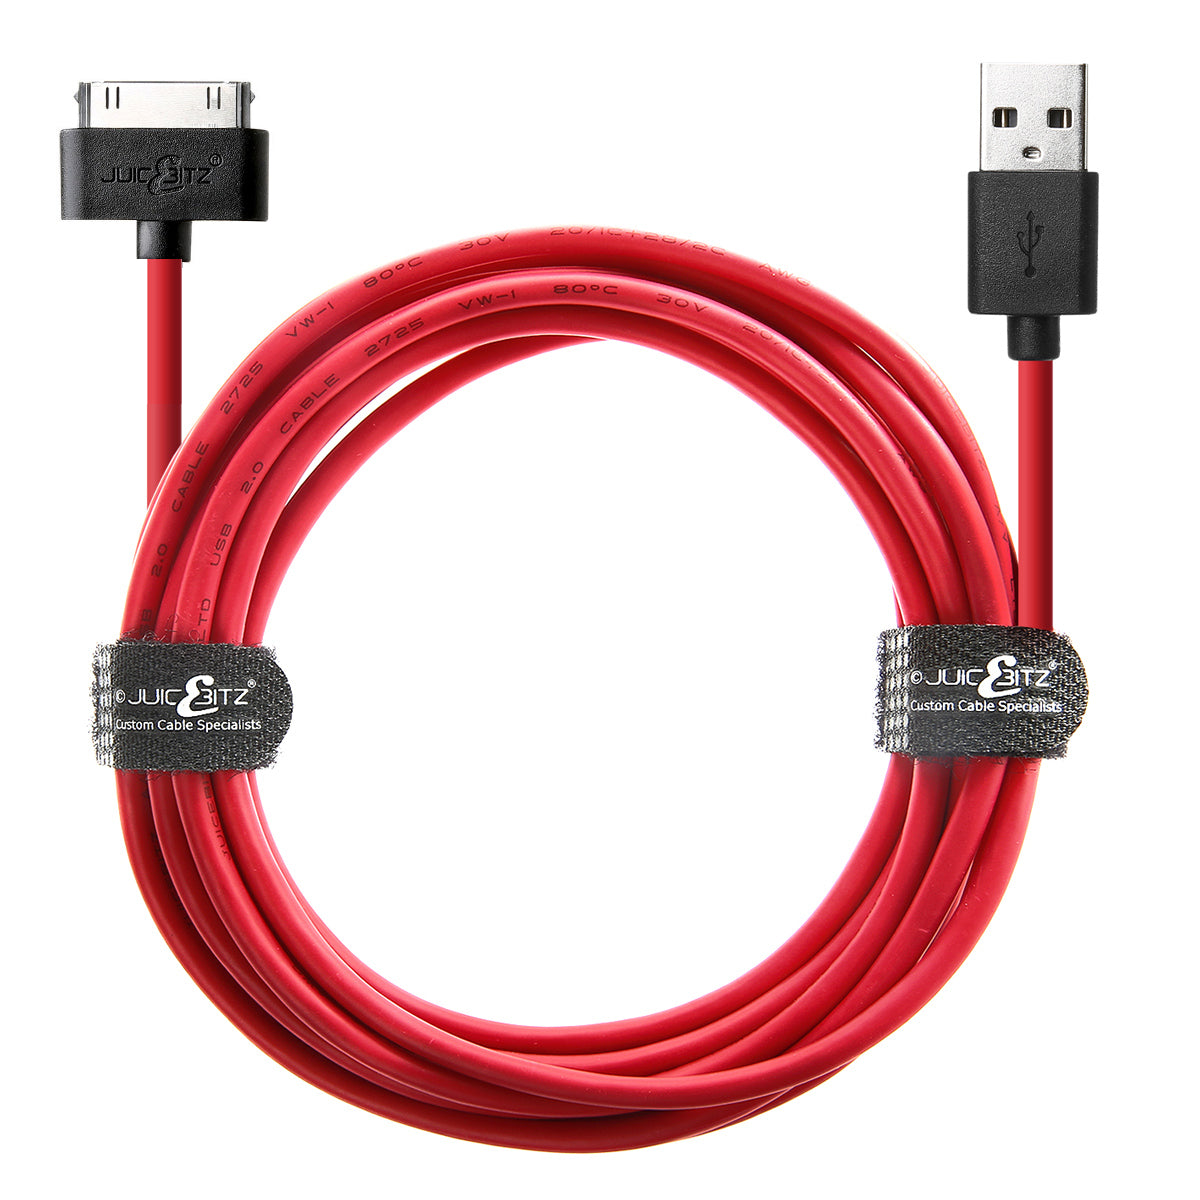 Apple 30 Pin USB Charger Cable Sync Lead for iPhone, iPad, iPod - Red